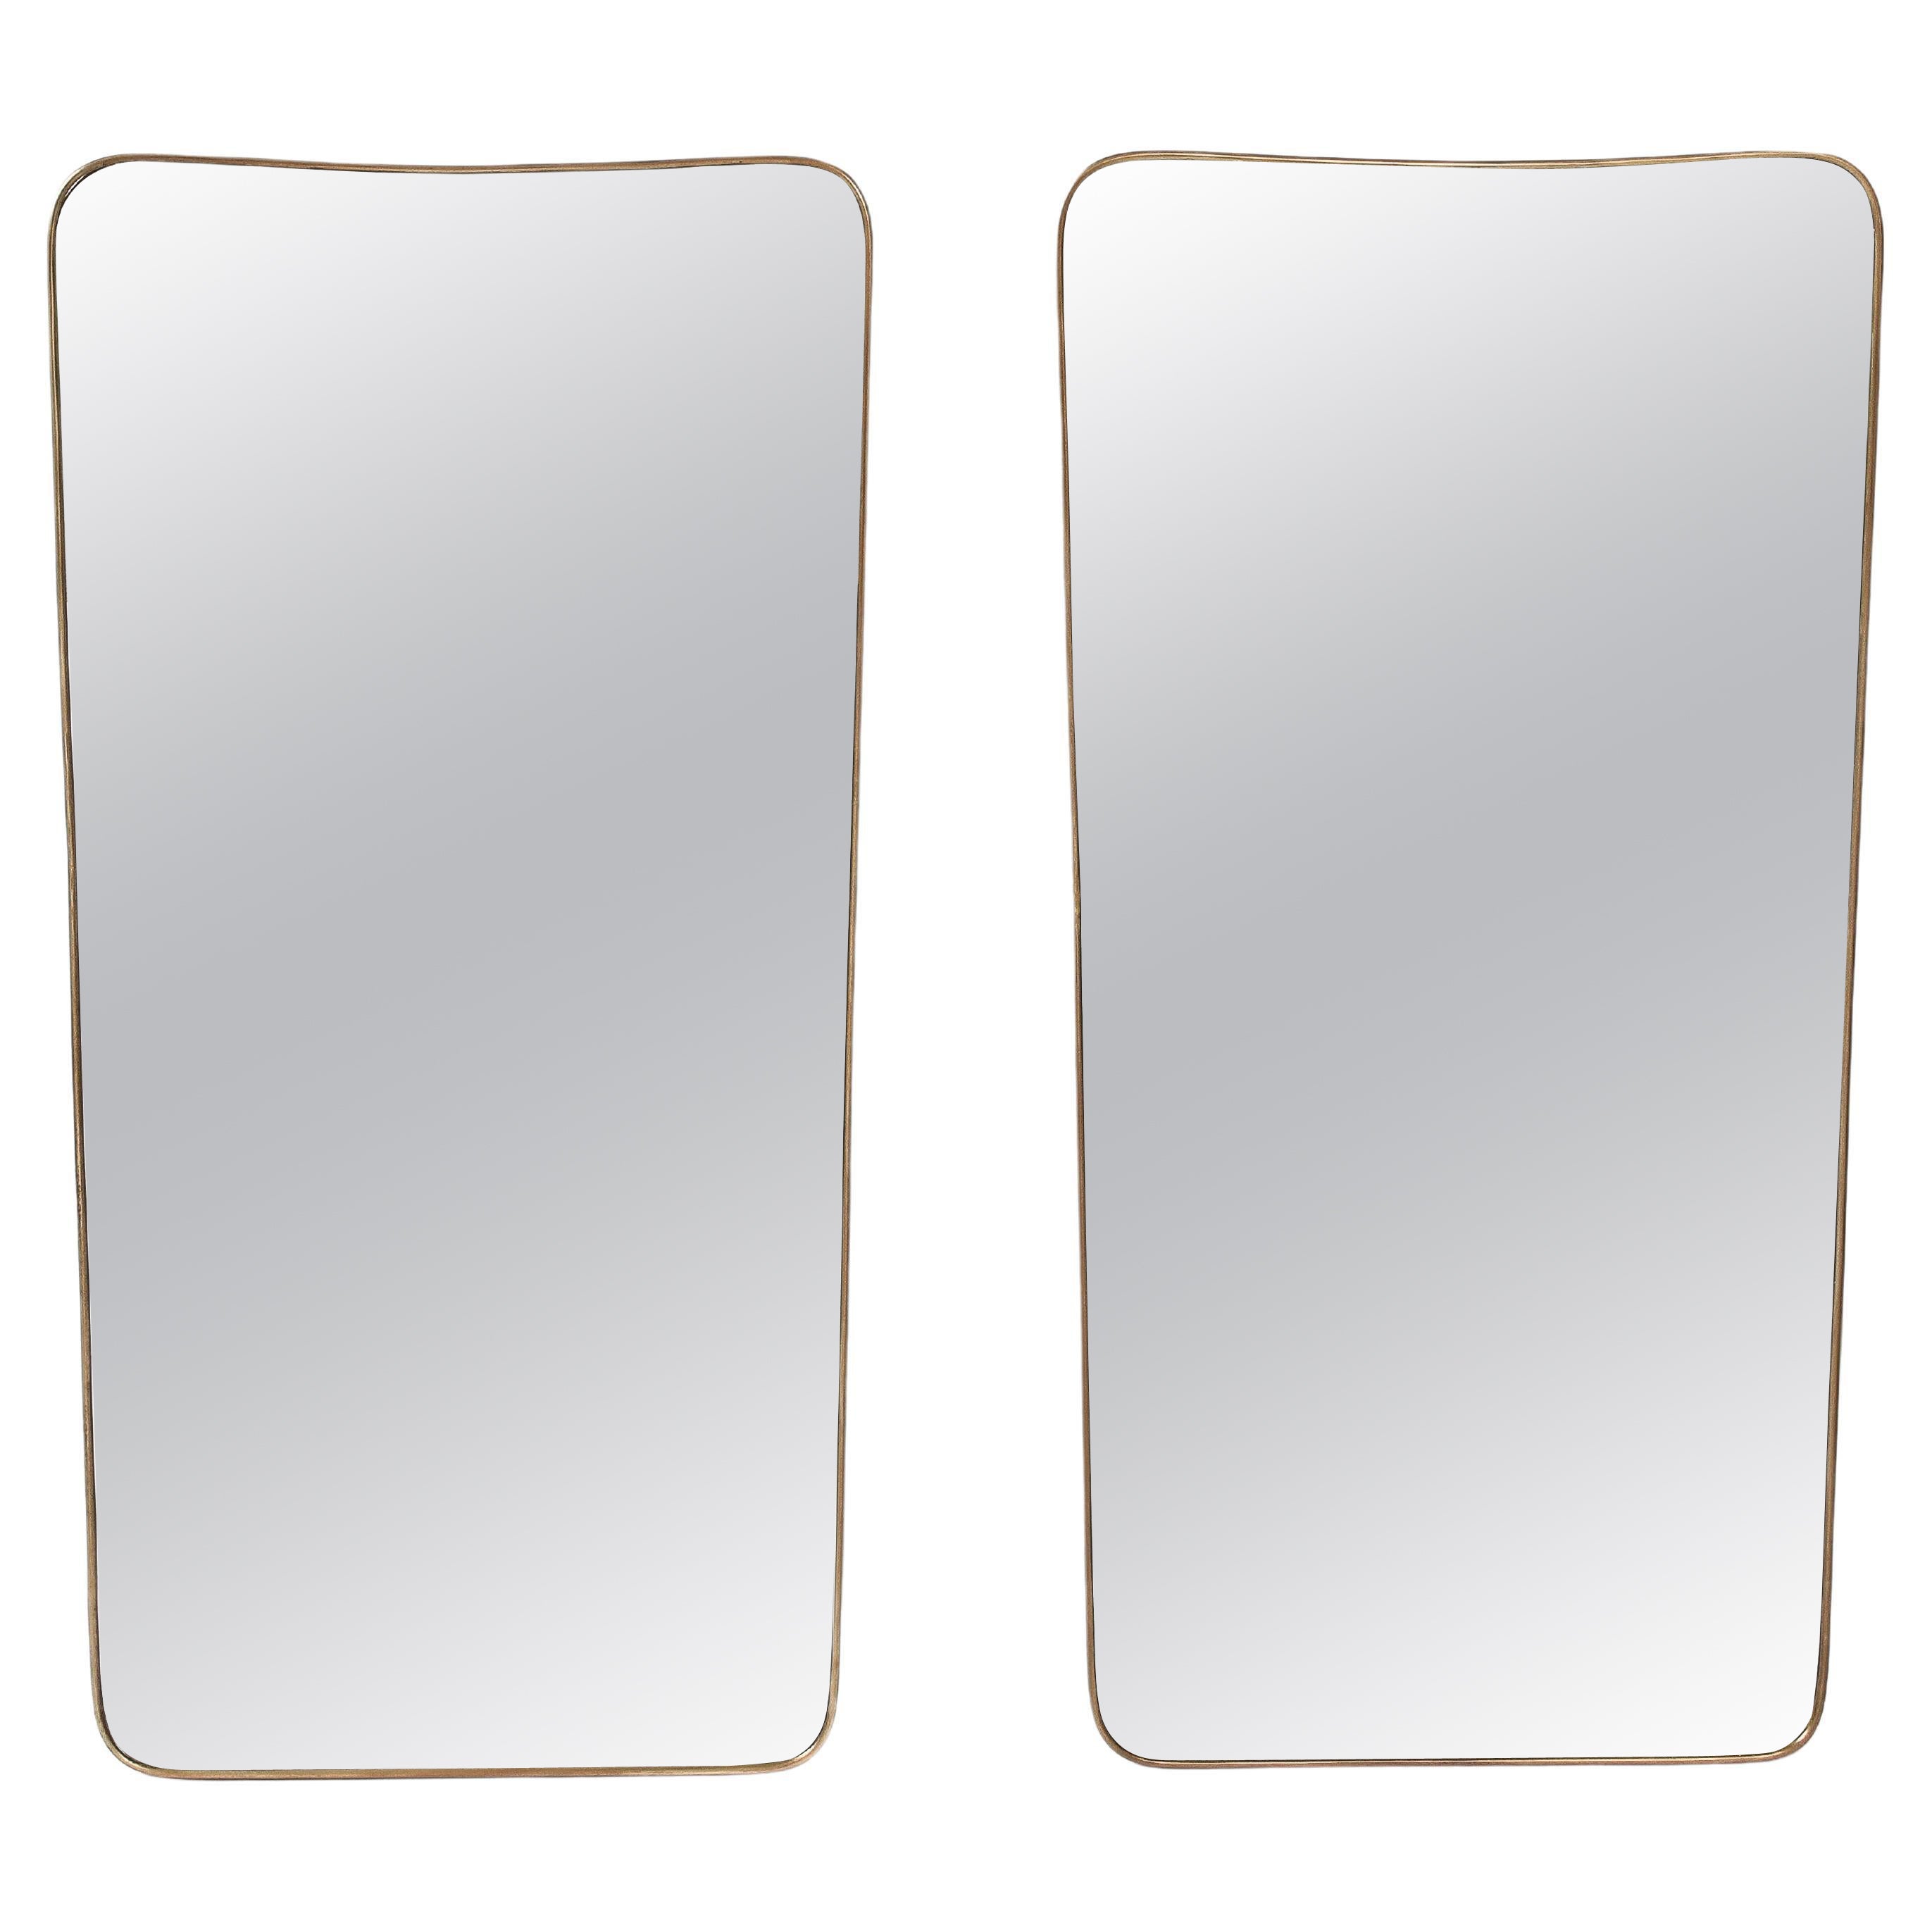 Midcentury Italian Modernist Pair of Large Shaped Brass Mirrors, 1950s For Sale